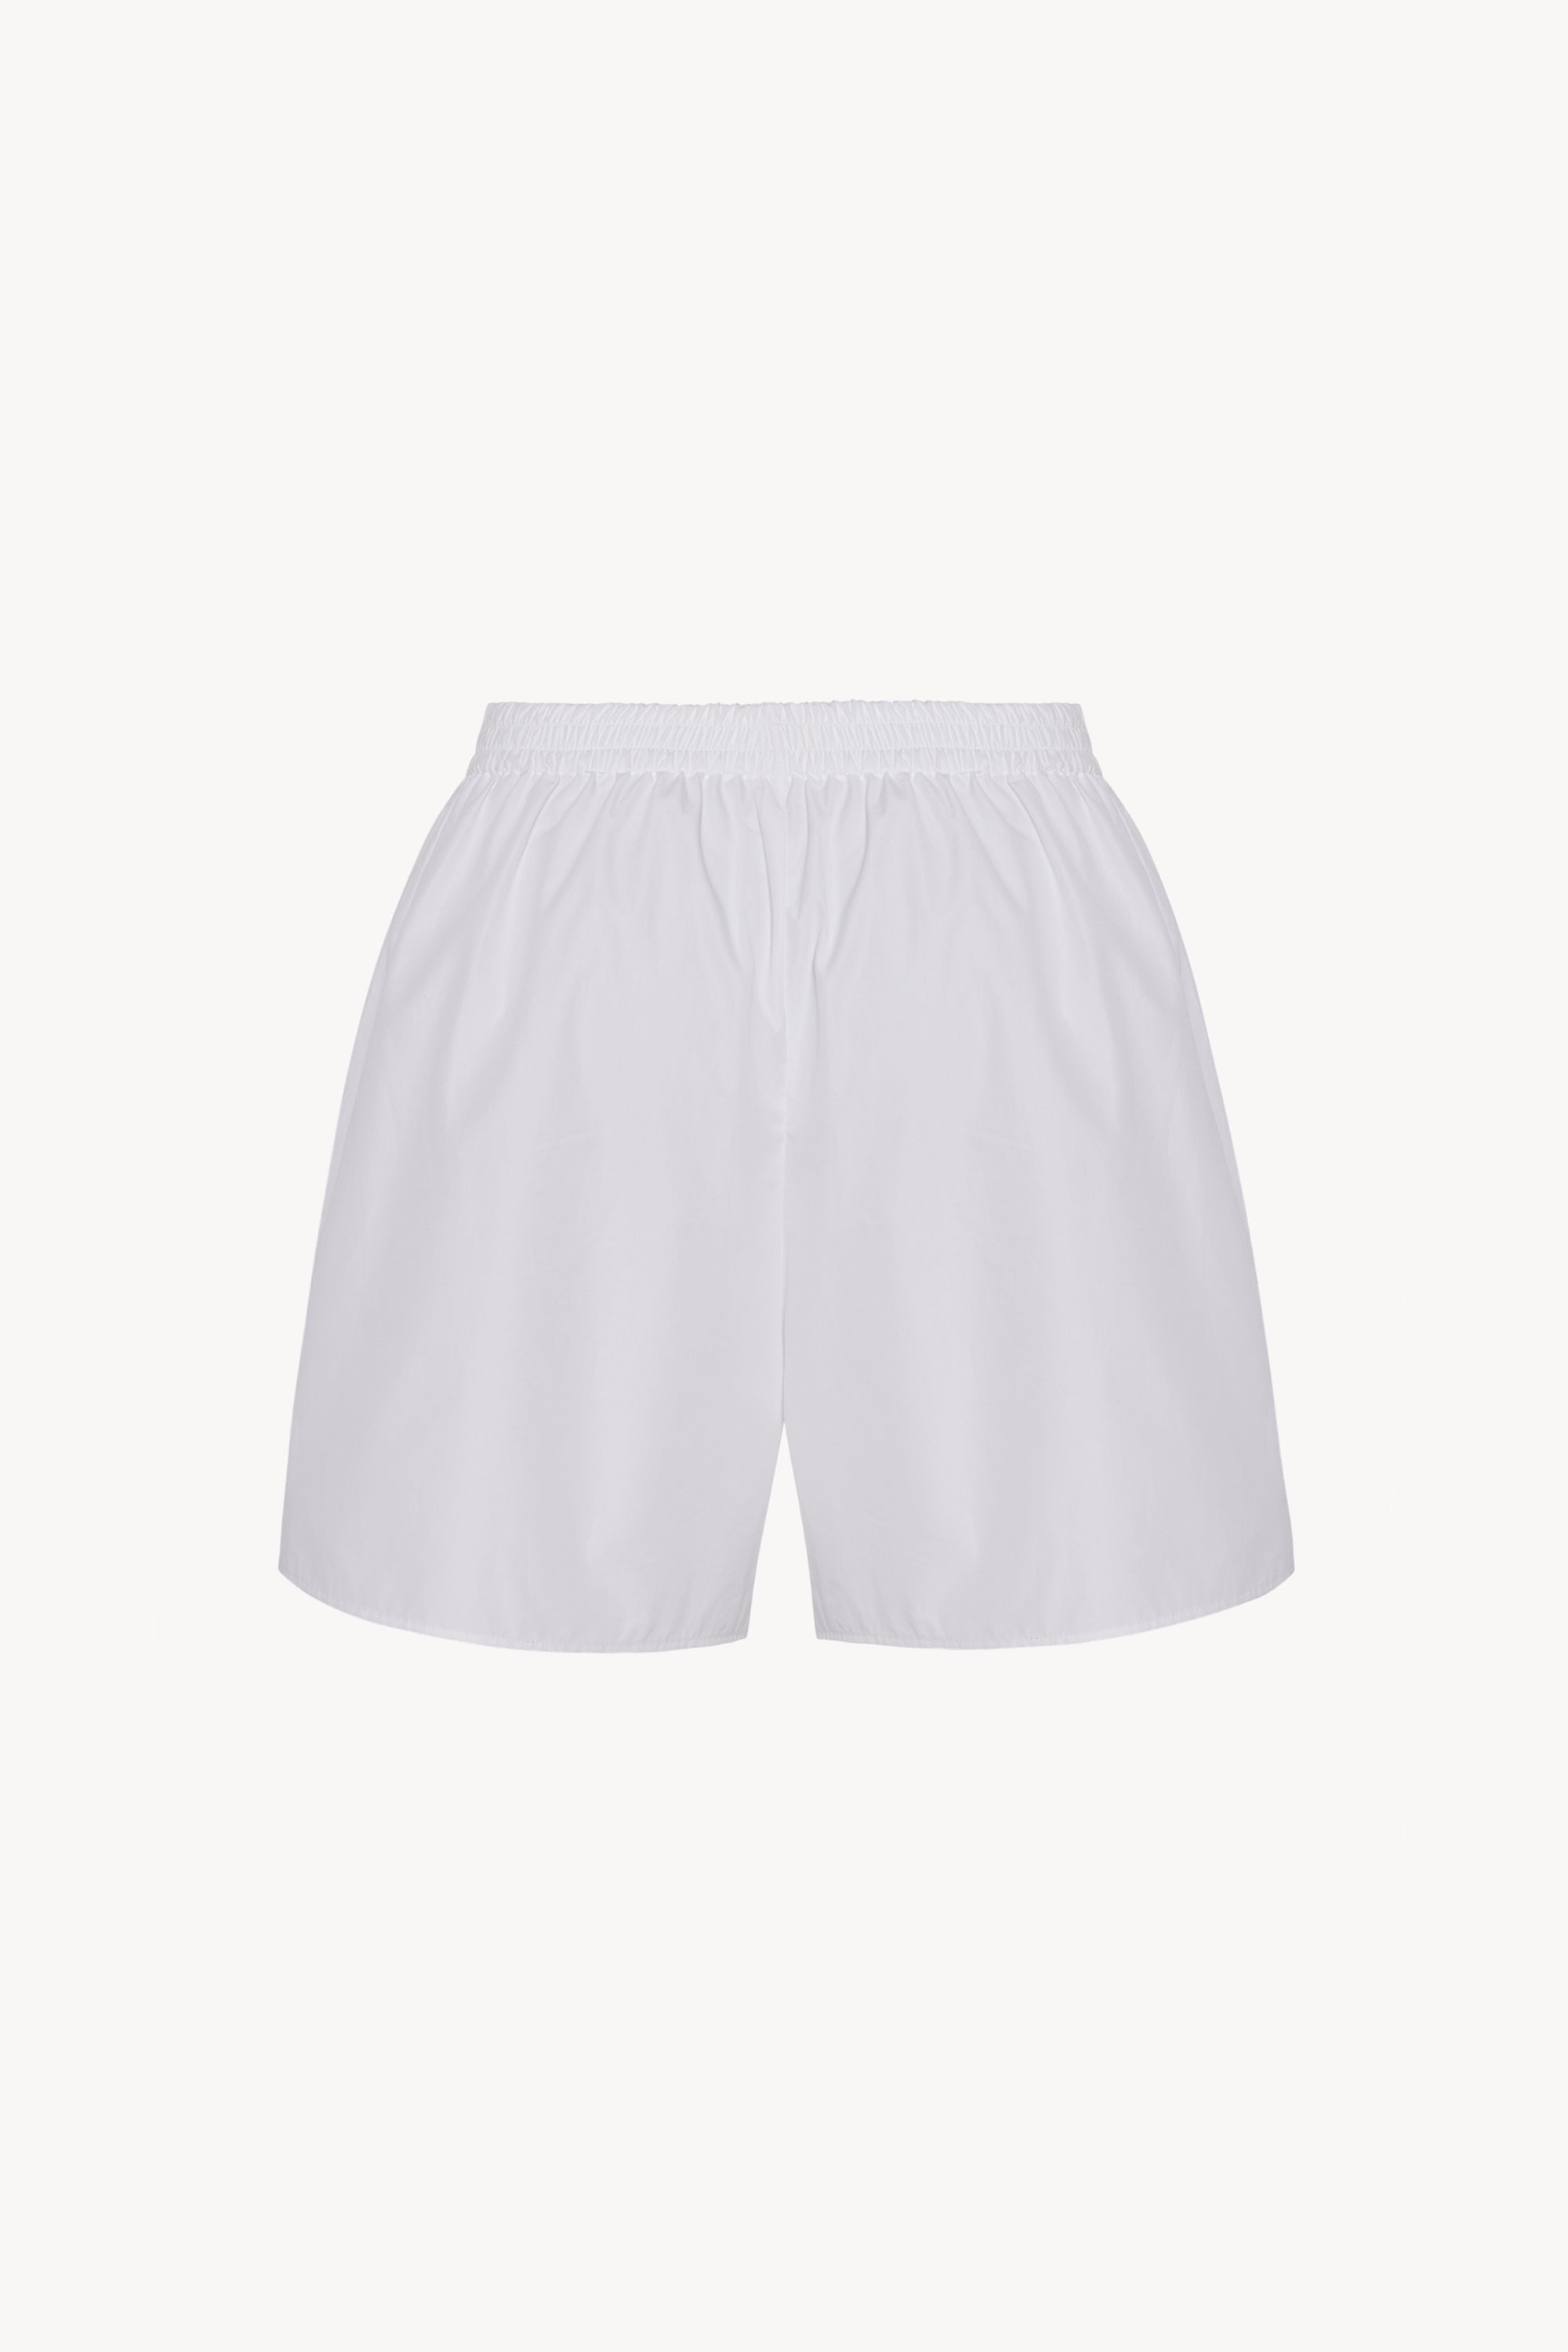 Gunther Short in Cotton and Cashmere - 2